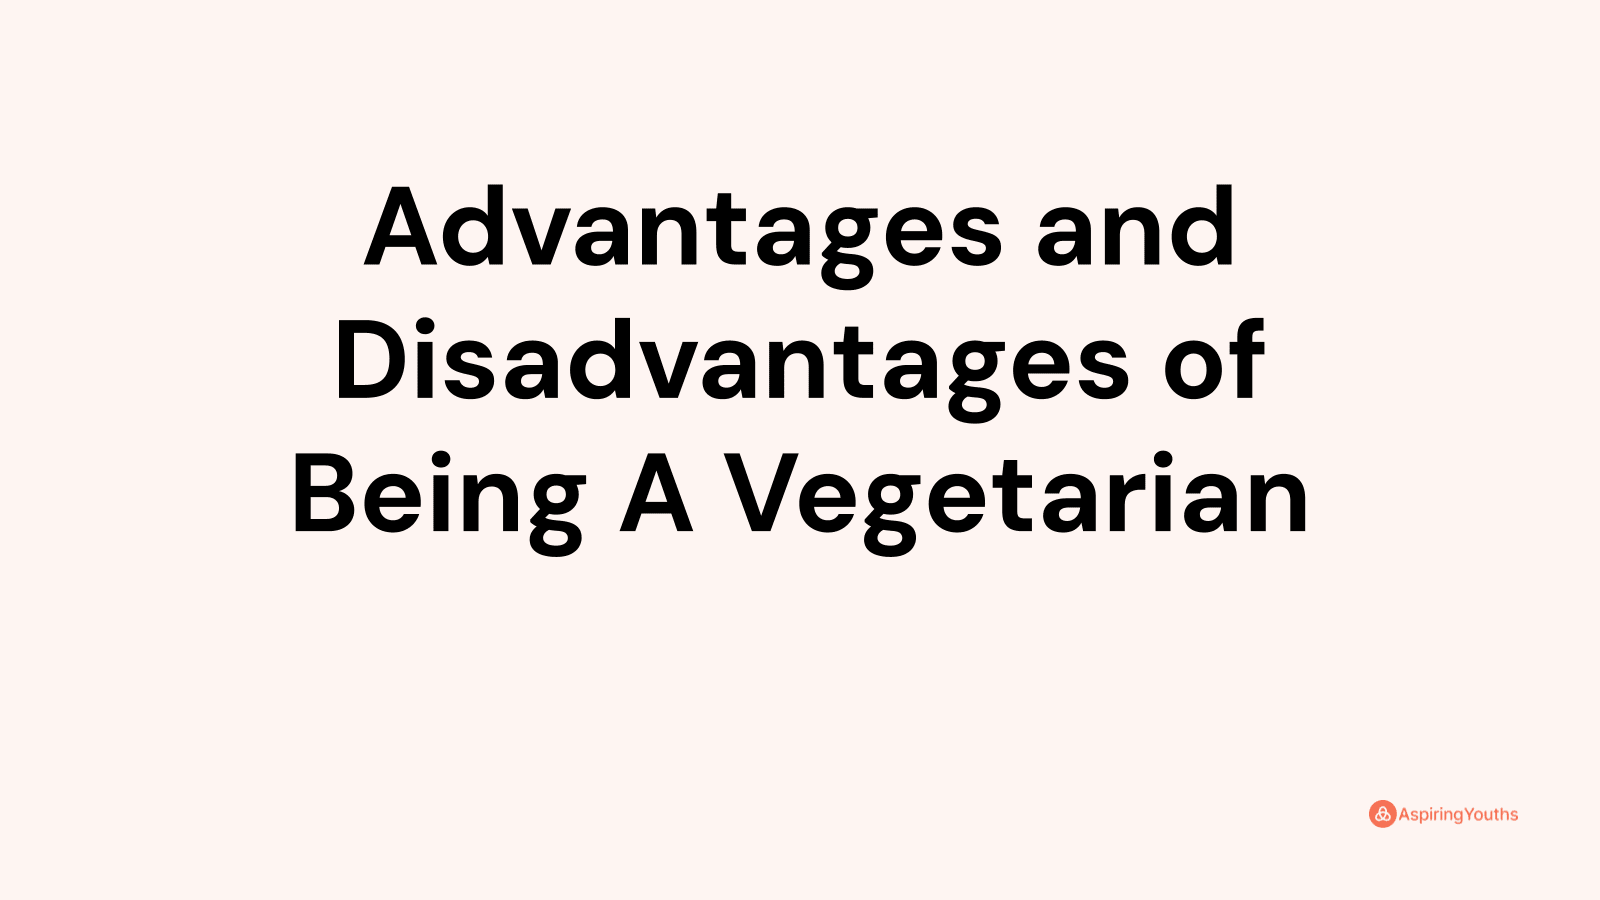 Advantages and disadvantages of Being A Vegetarian